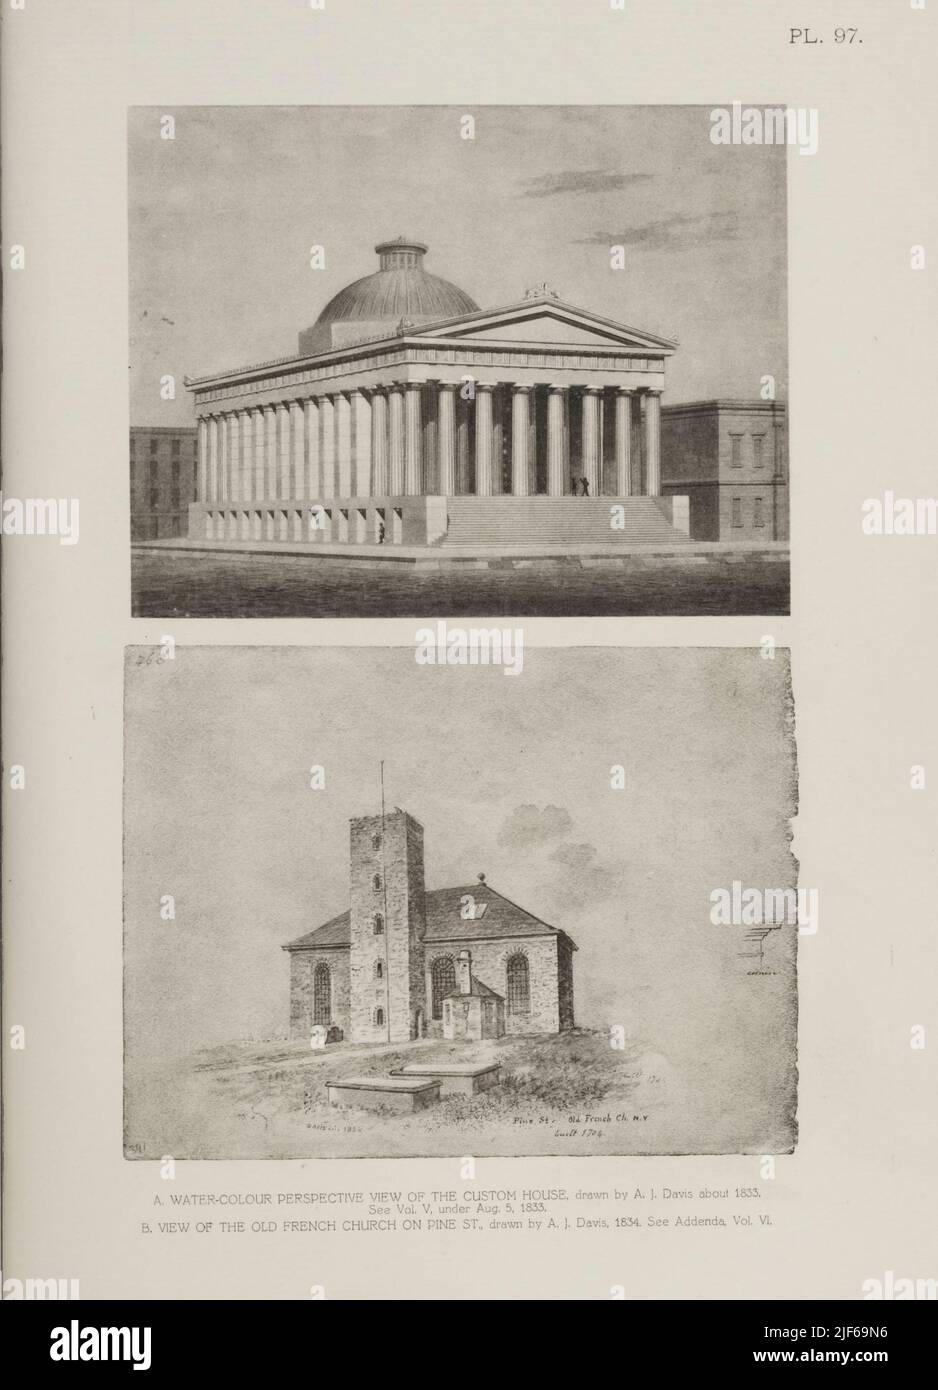 PERSPECTIVE VIEW OF THE CUSTOMHOUSE; DRAWN BY A. J. DAVIS ABOUT 1833 and VIEW OF THE OLD FRENCH CHURCH ON PINE ST.; DRAWN BY A. J. DAVIS ABOUT 1834. From the book The iconography of Manhattan Island, 1498-1909 compiled from original sources and illustrated by photo-intaglio reproductions of important maps, plans, views, and documents in public and private collections - Volume 6 Stock Photo